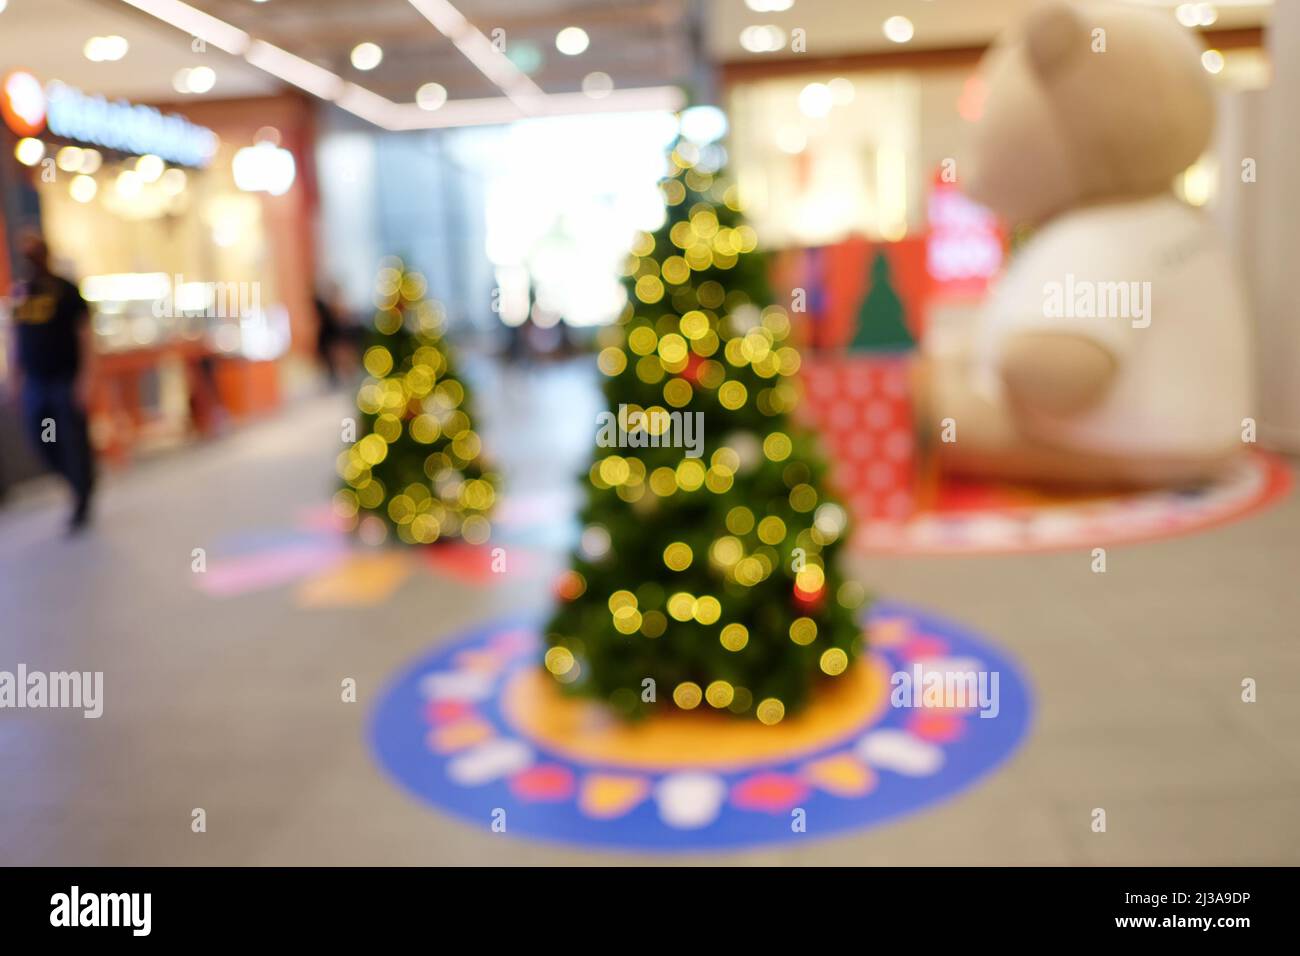 Abstract blur christmas tree background or defocused shopping mall of department store for design in your work backdrop concept. Stock Photo